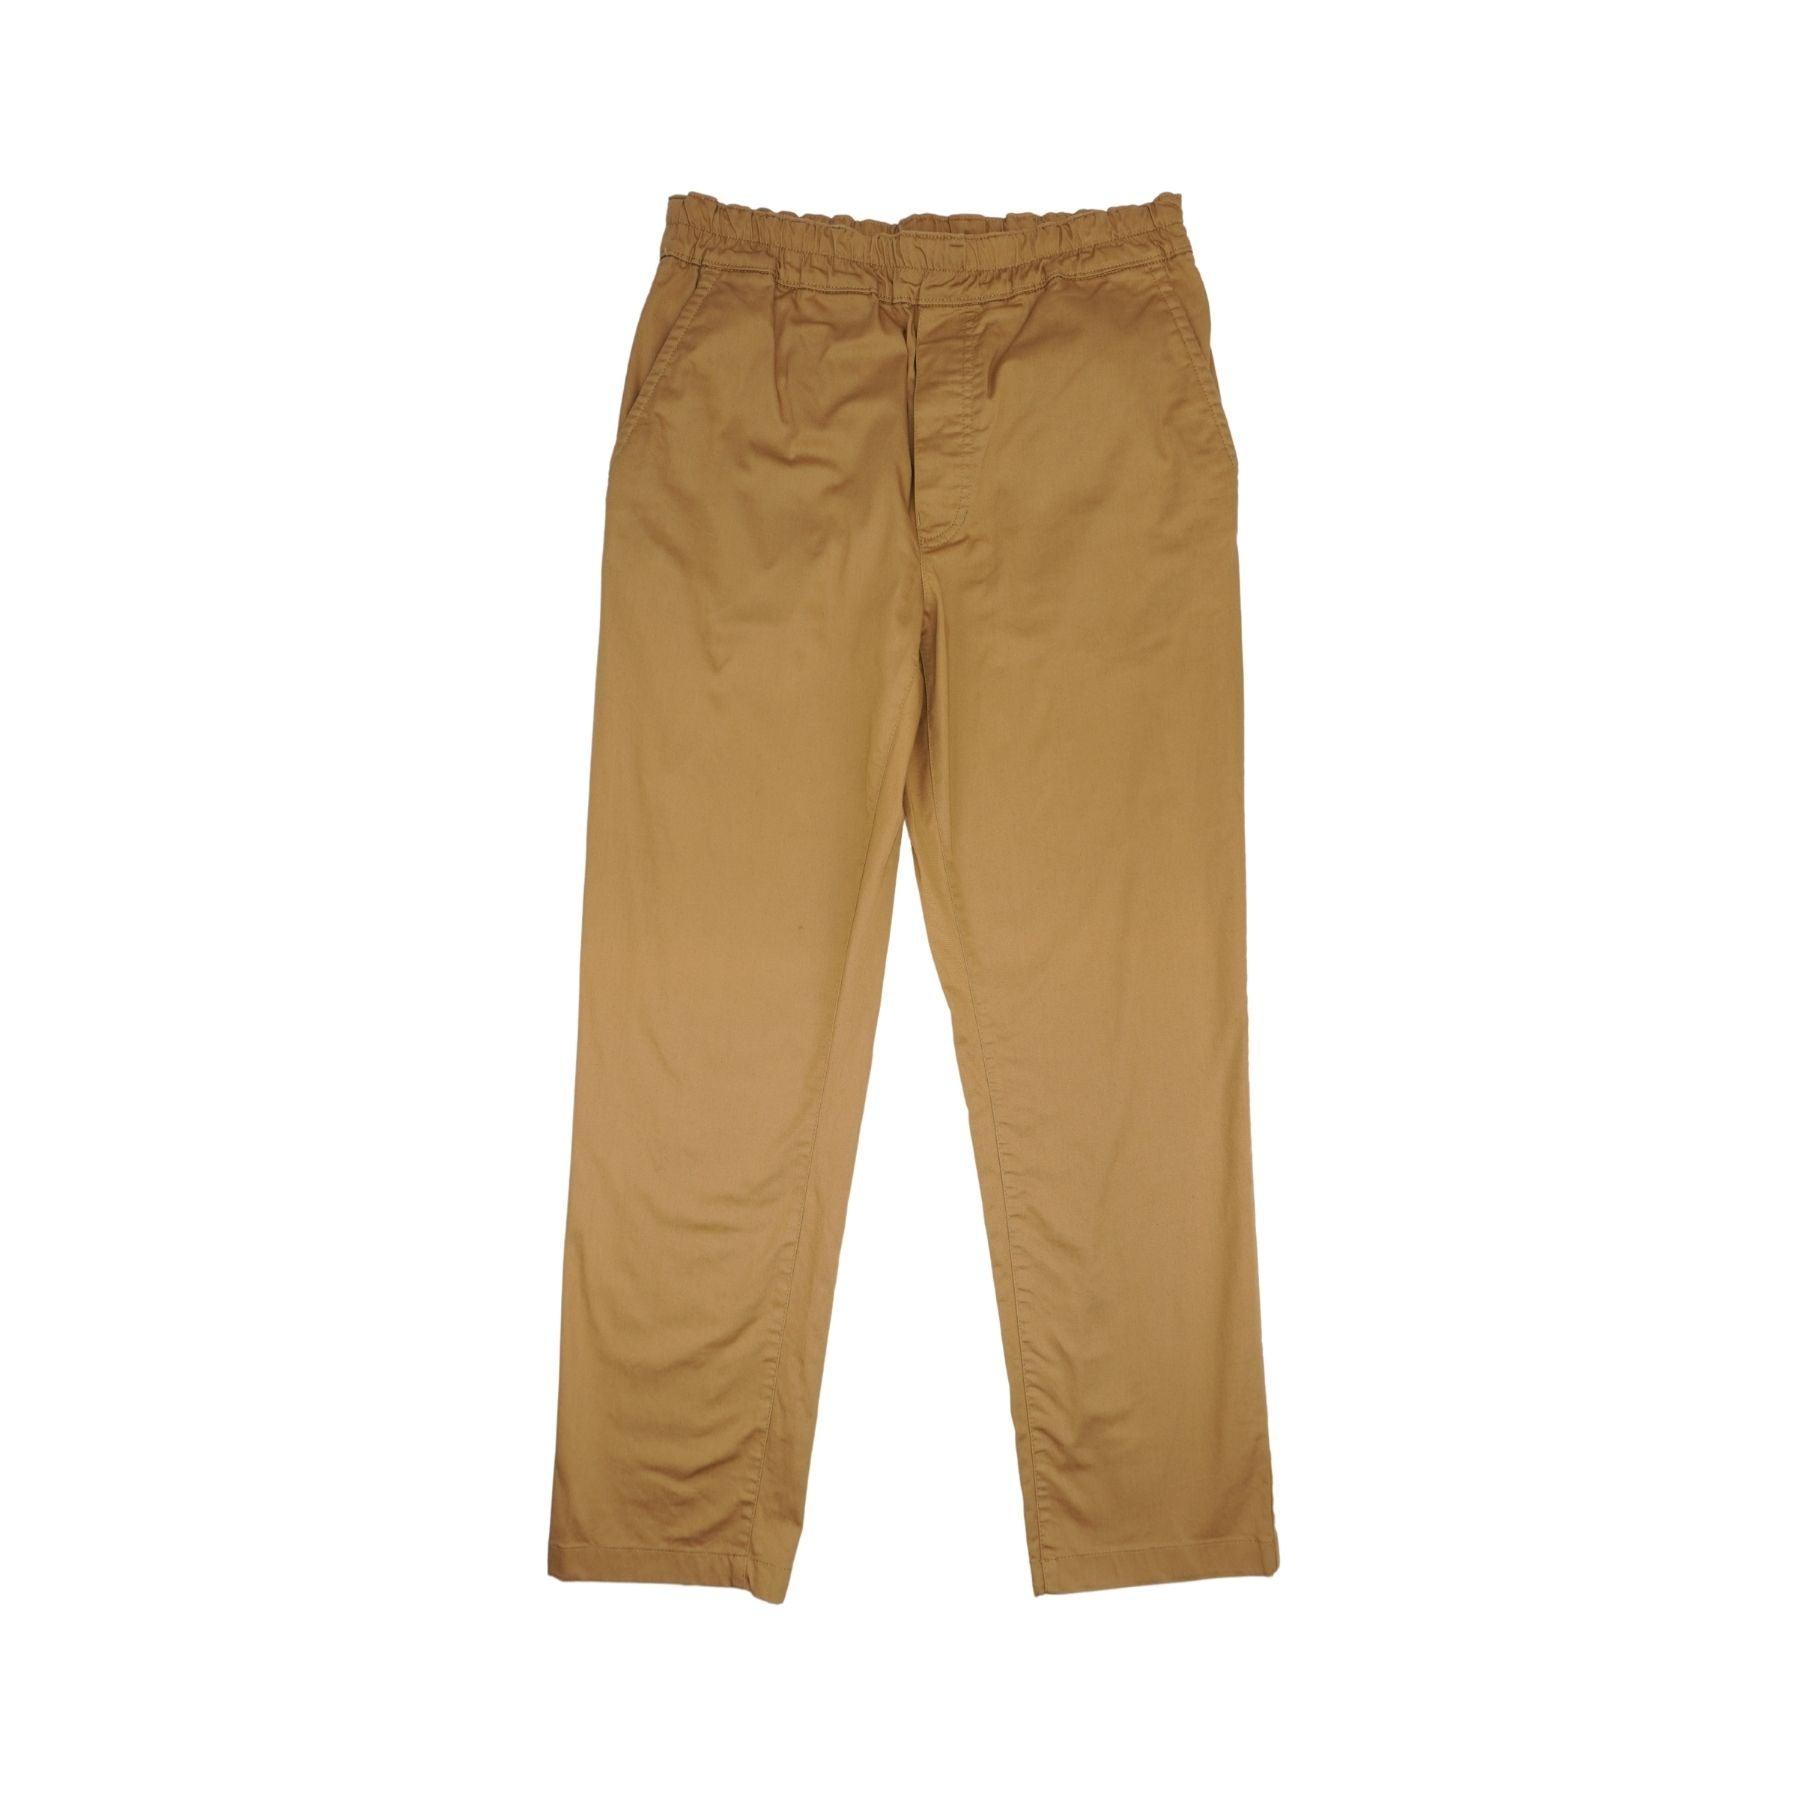 Acne Pants - Men's 48 - Fashionably Yours